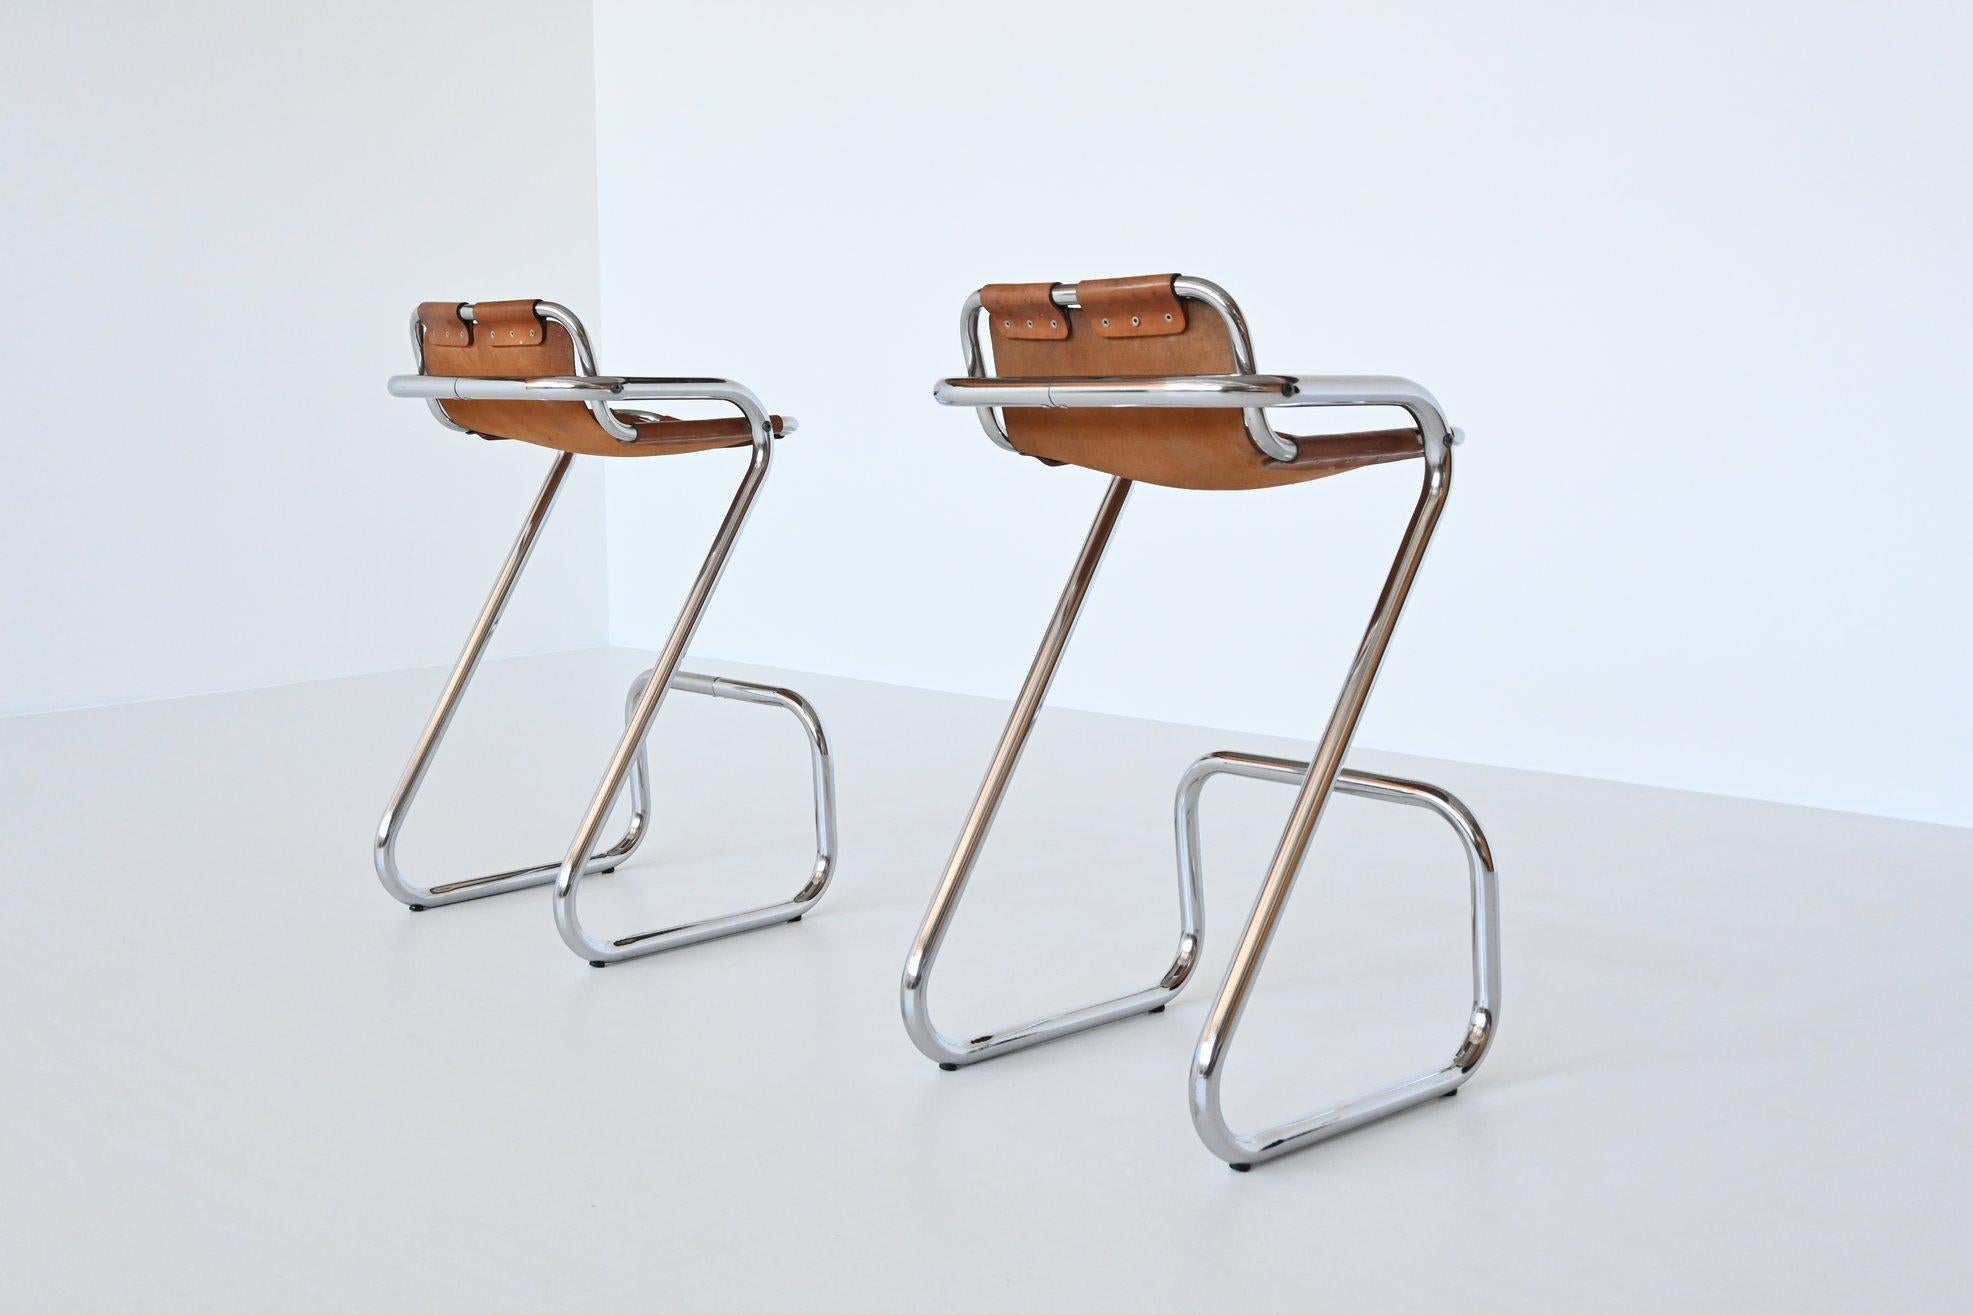 The stools have chrome plated tubular metal frames and thick natural saddle leather seats with a beautiful patina of usage. They are strong, comfortable and look amazing in a kitchen or bar. For sure one of the most popular bar stools around and we